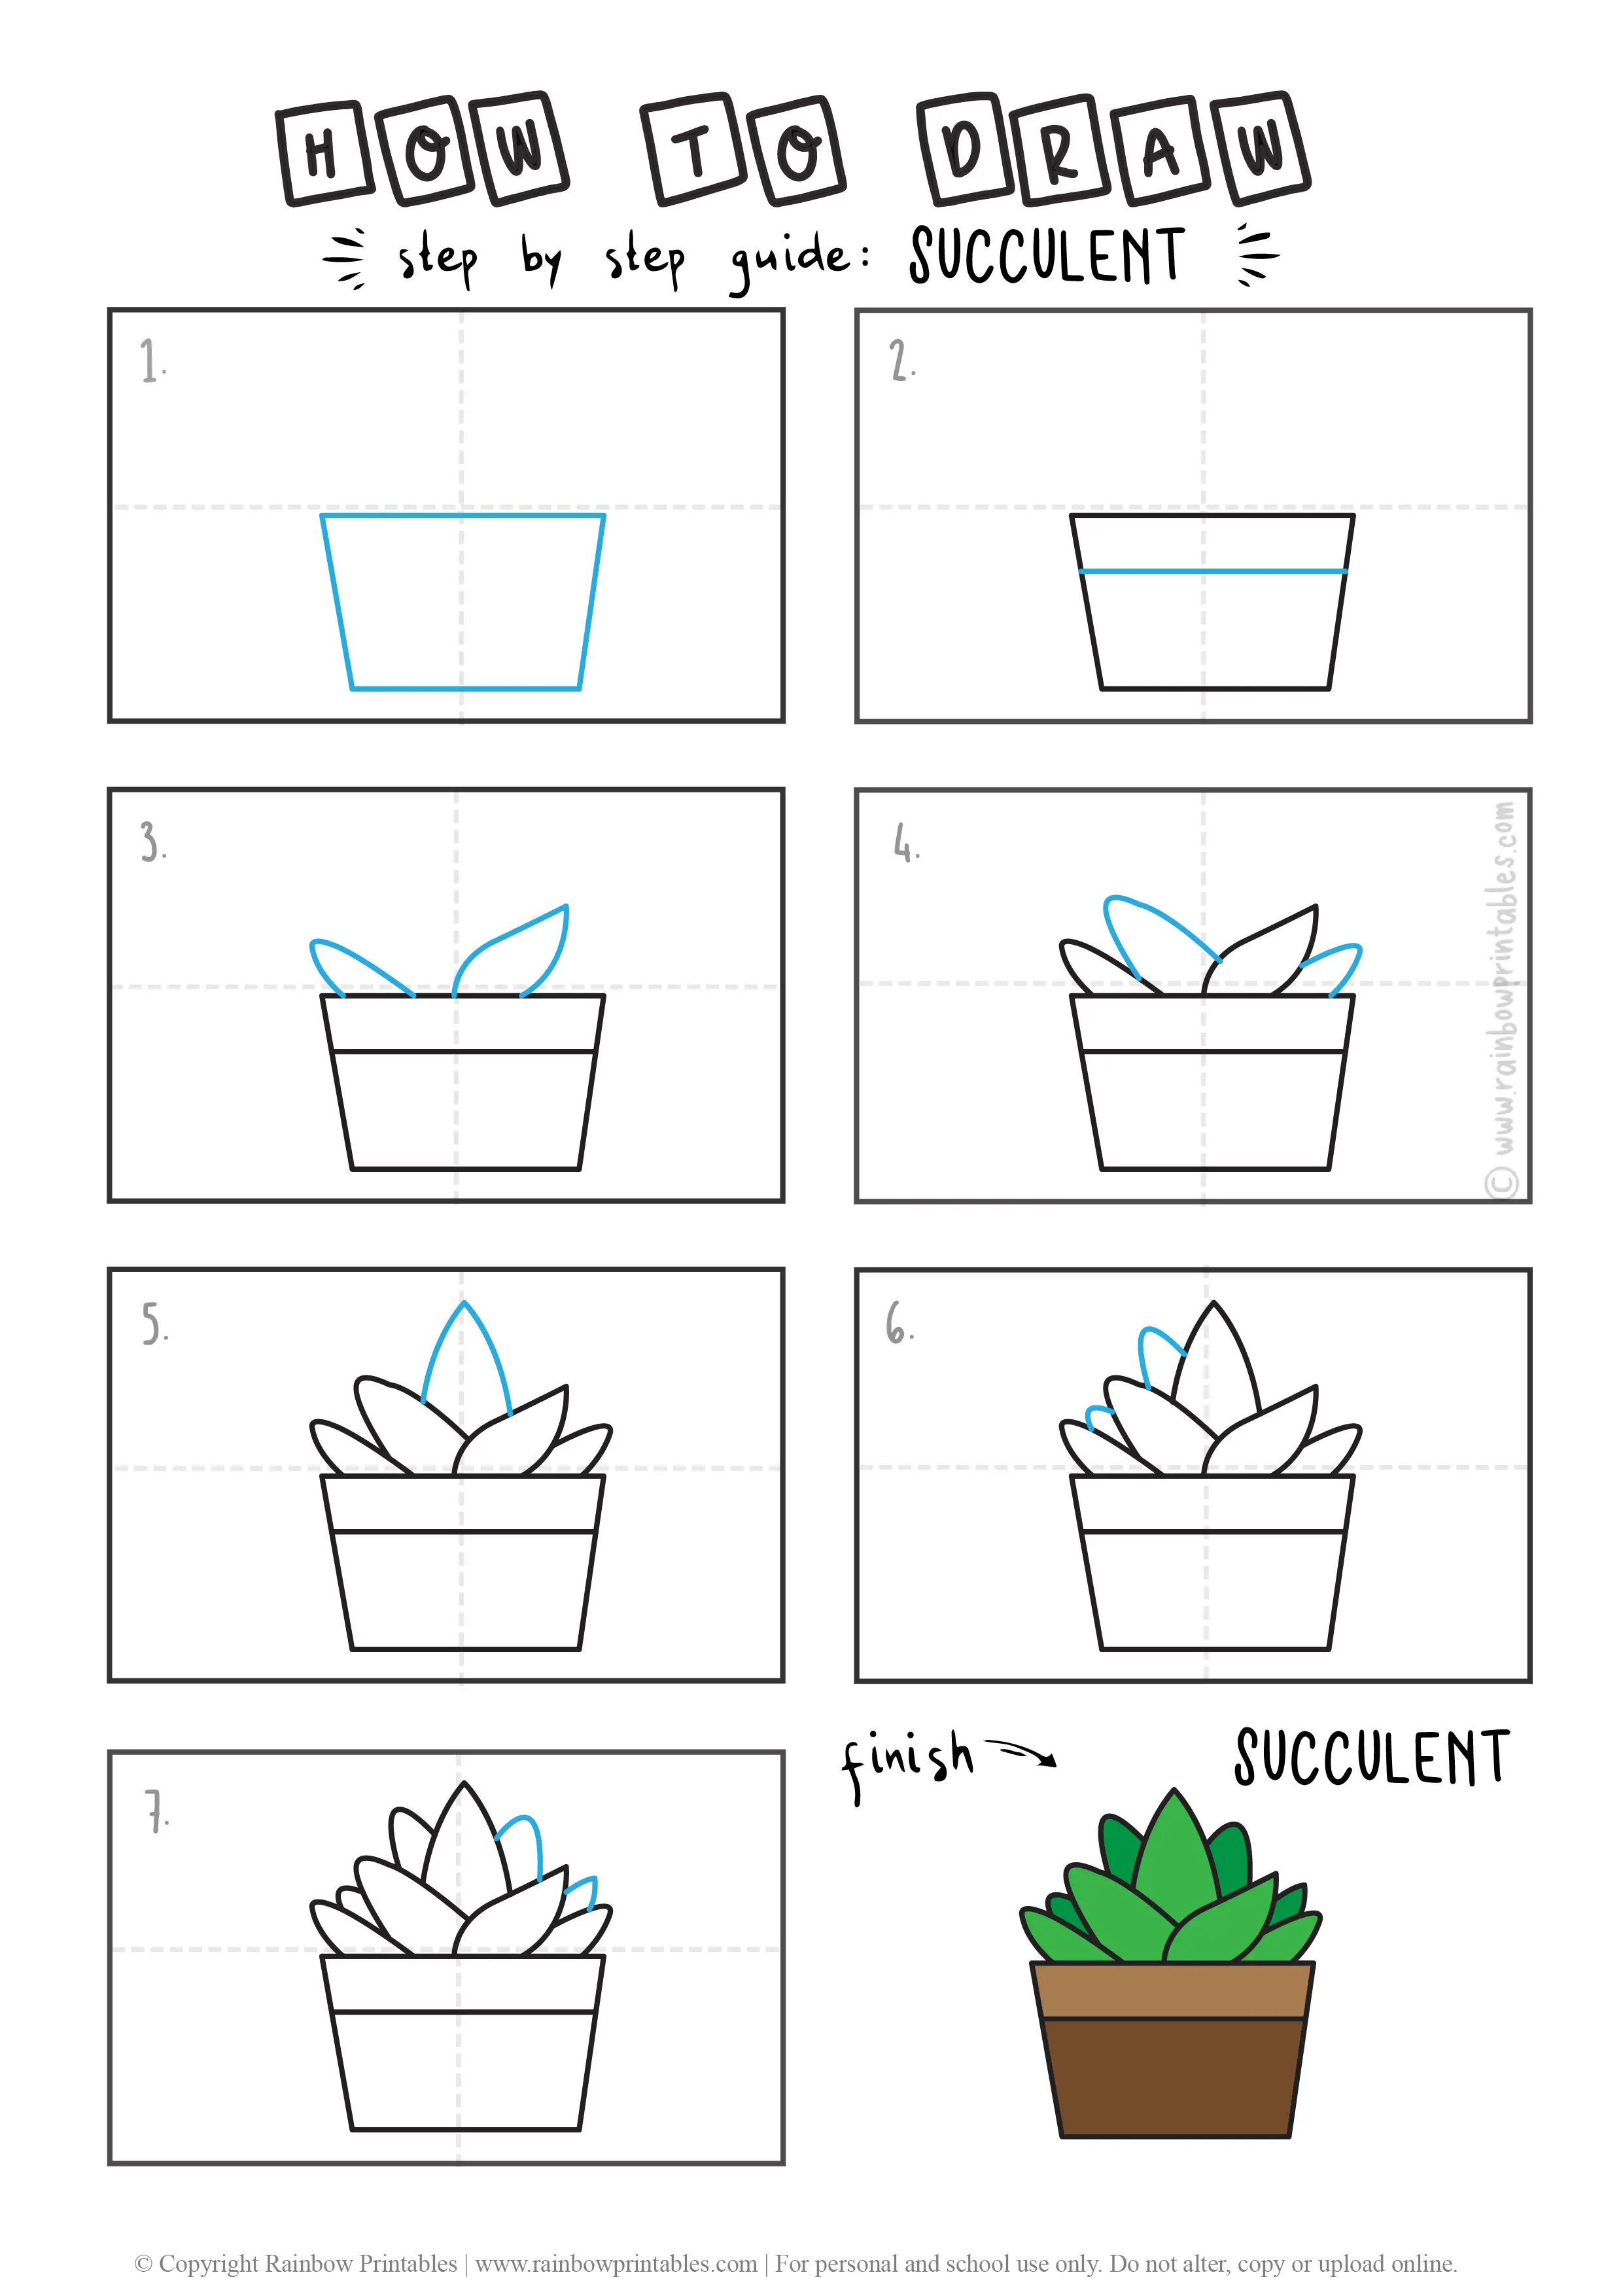 How To Draw A Plant, Step by Step, Drawing Guide, by Dawn - DragoArt